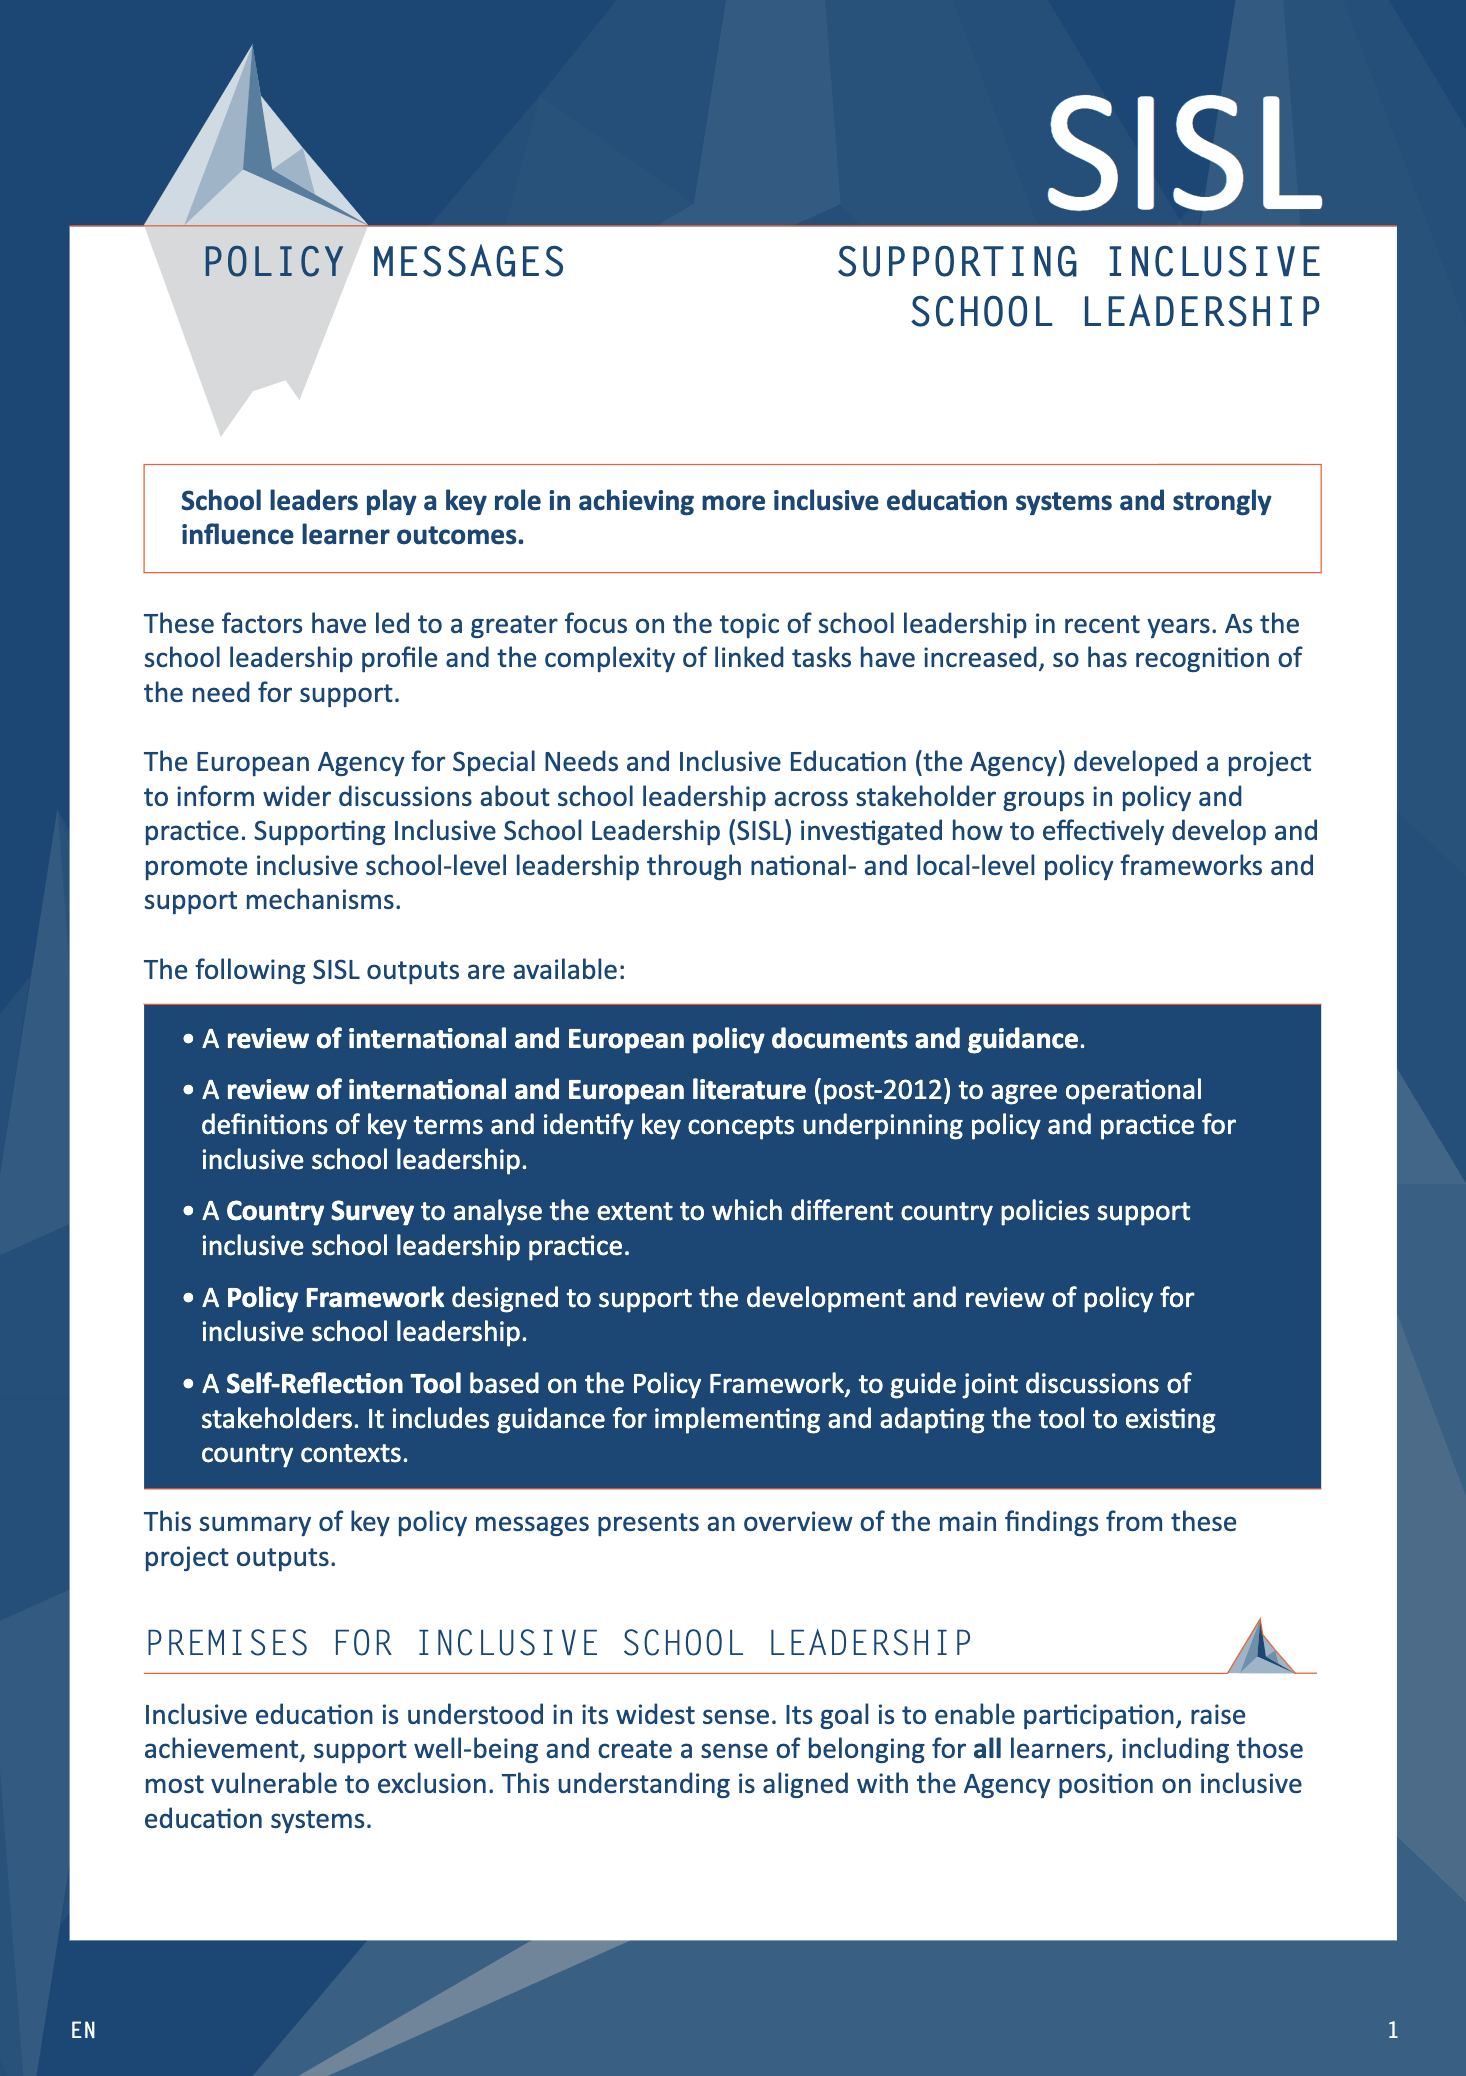 Supporting Inclusive School Leadership: Policy Messages